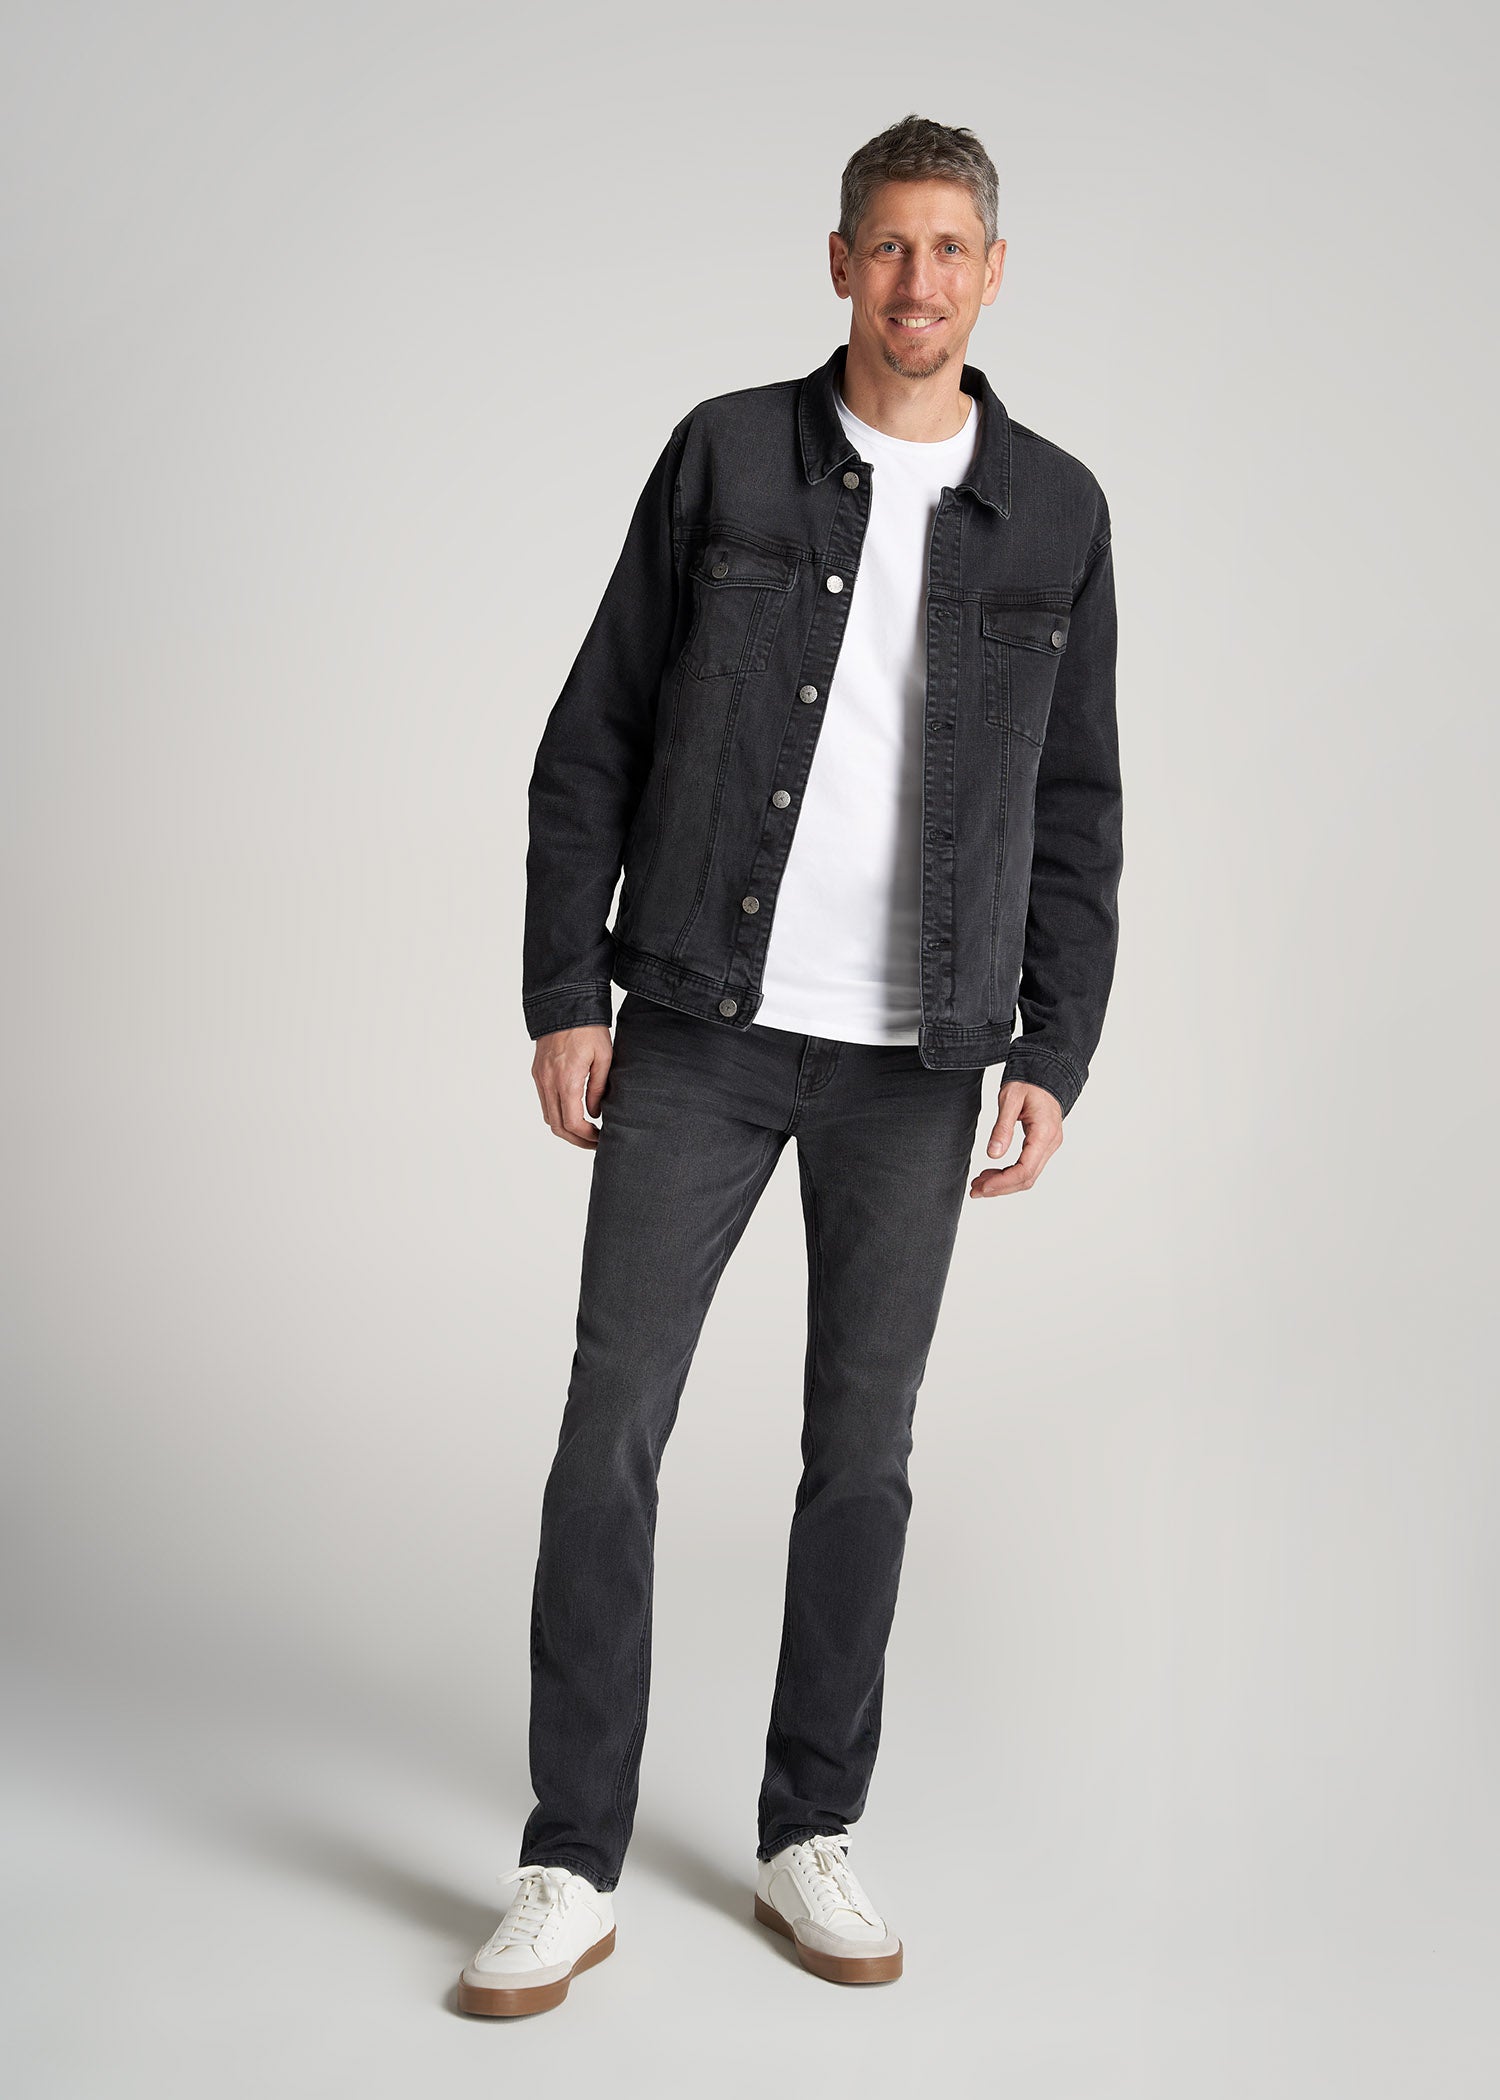 Chipotle Pepper Jean Jacket – Chipotle Goods